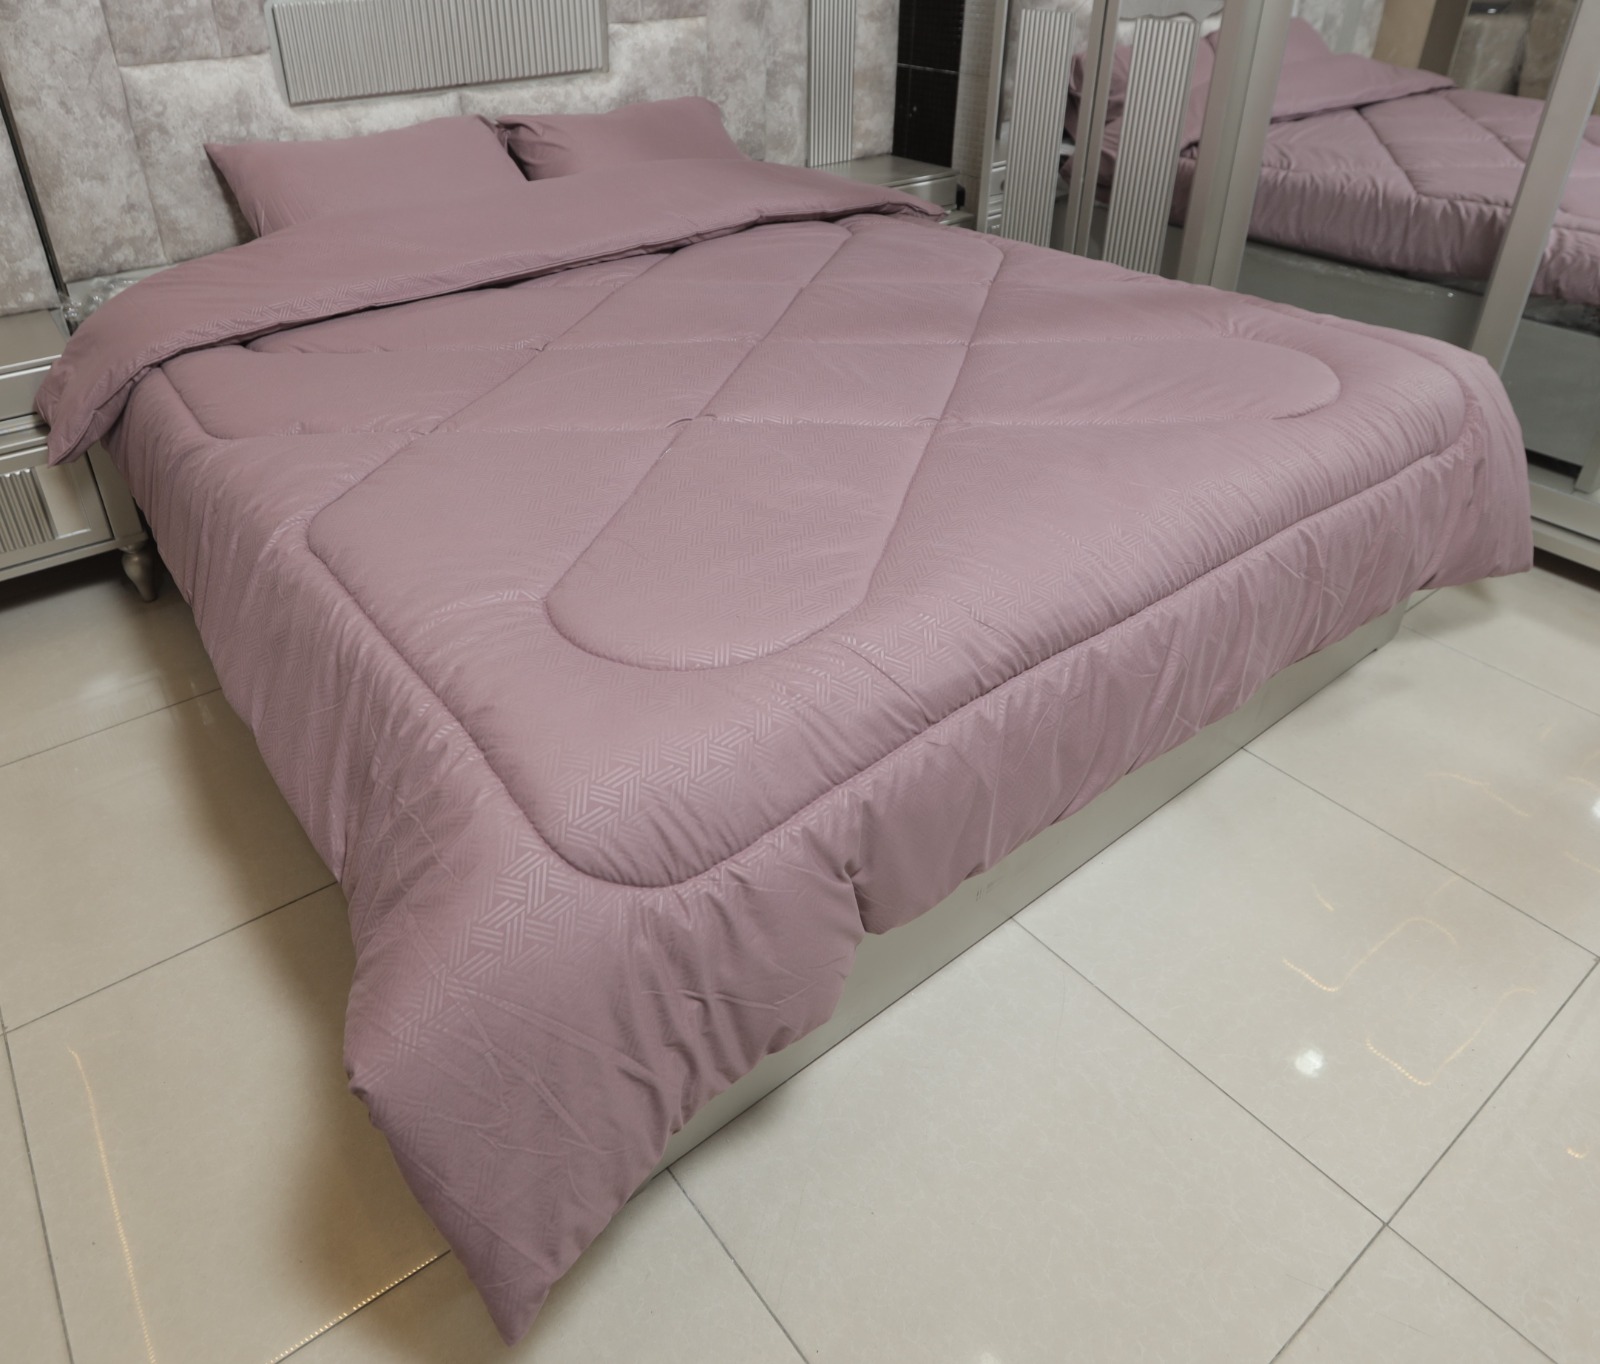 Quilted comforter in cool mauve